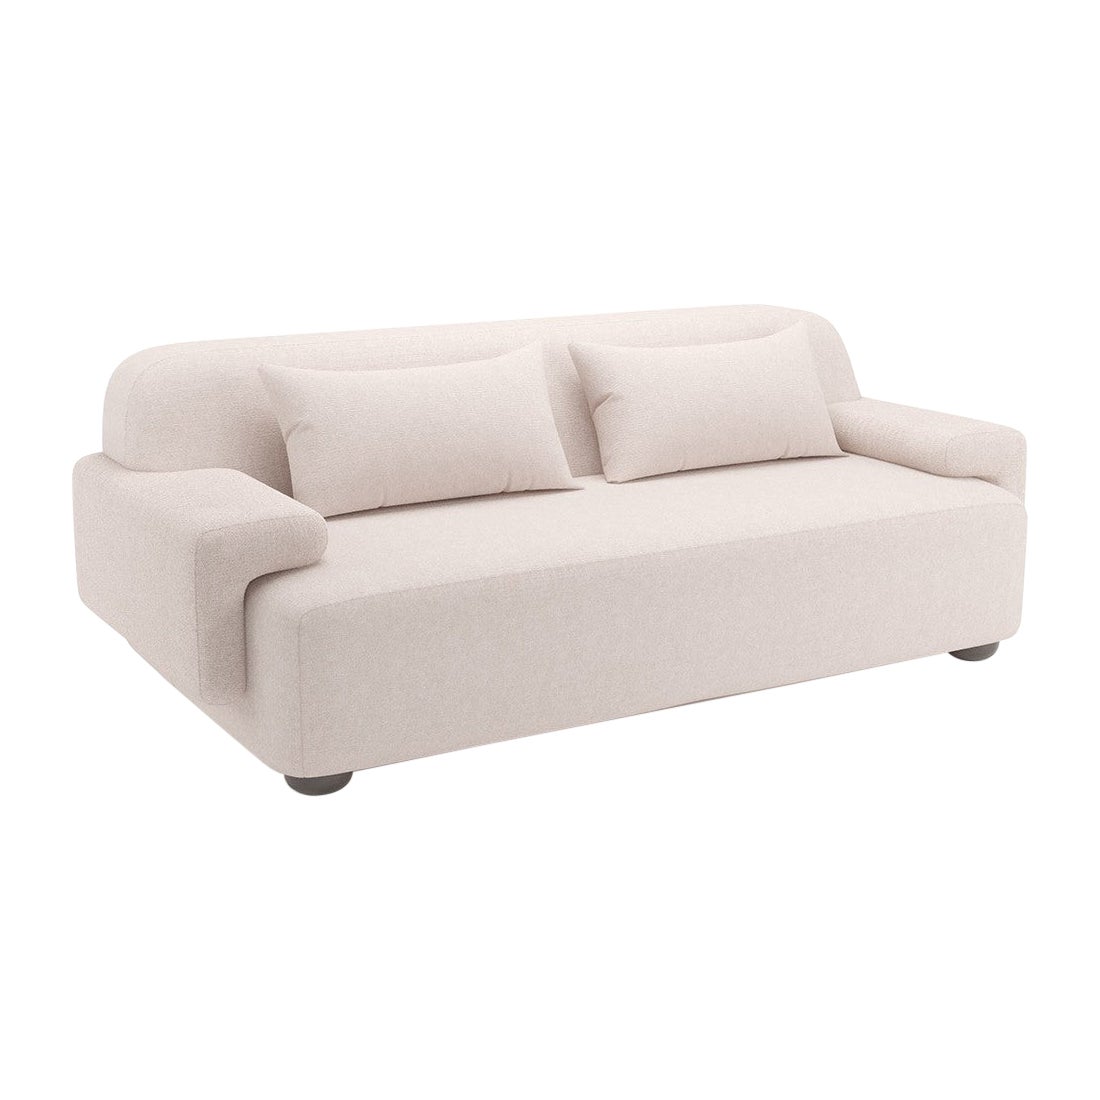 Popus Editions Lena 3 Seater Sofa in Natural Cork Linen Upholstery